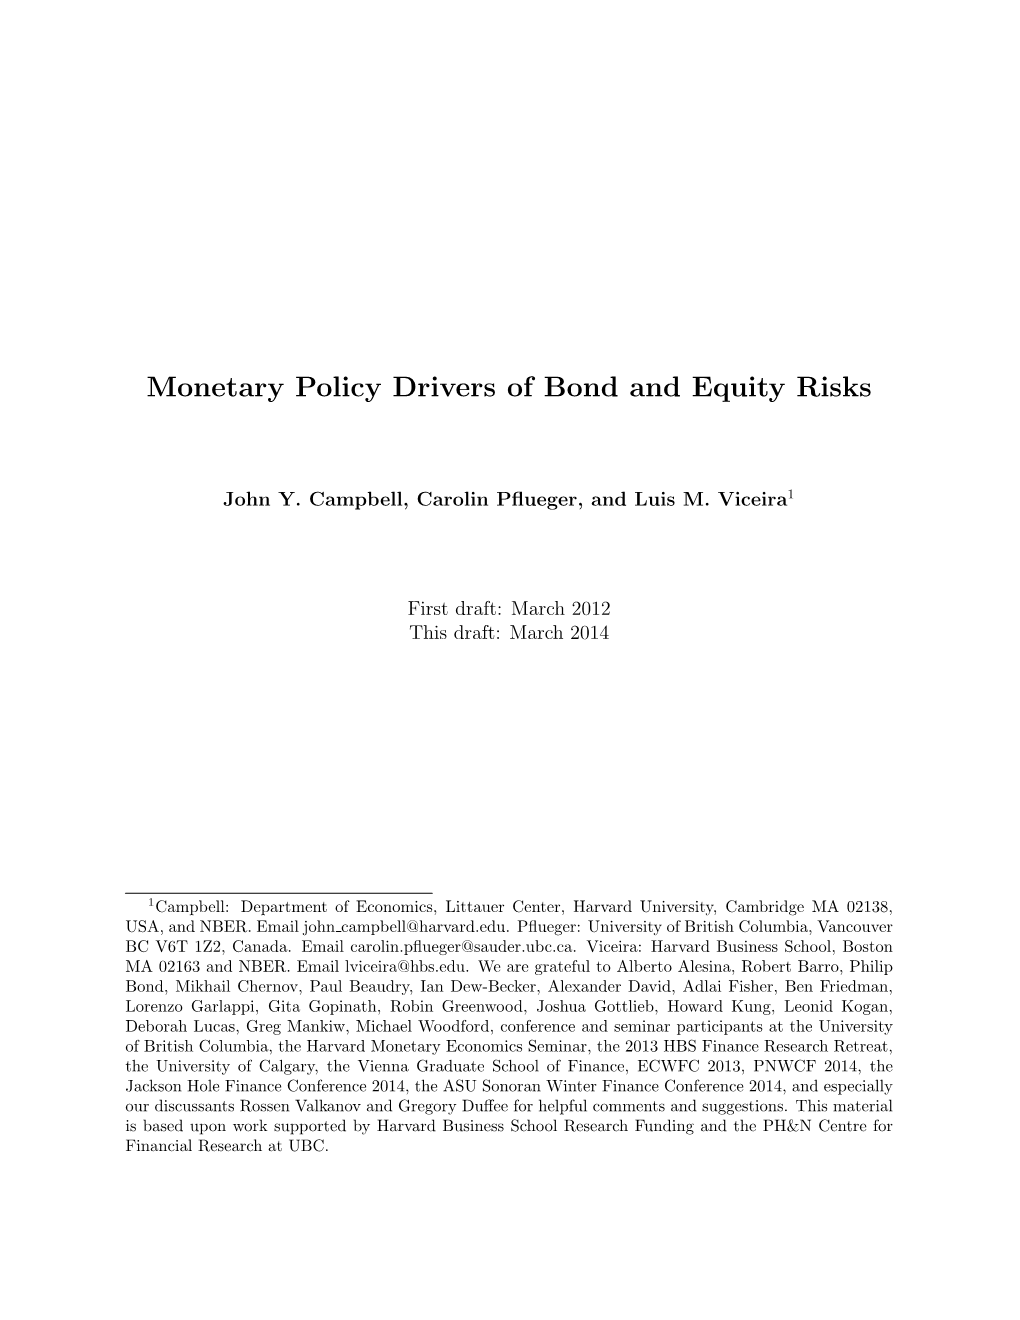 Monetary Policy Drivers of Bond and Equity Risks